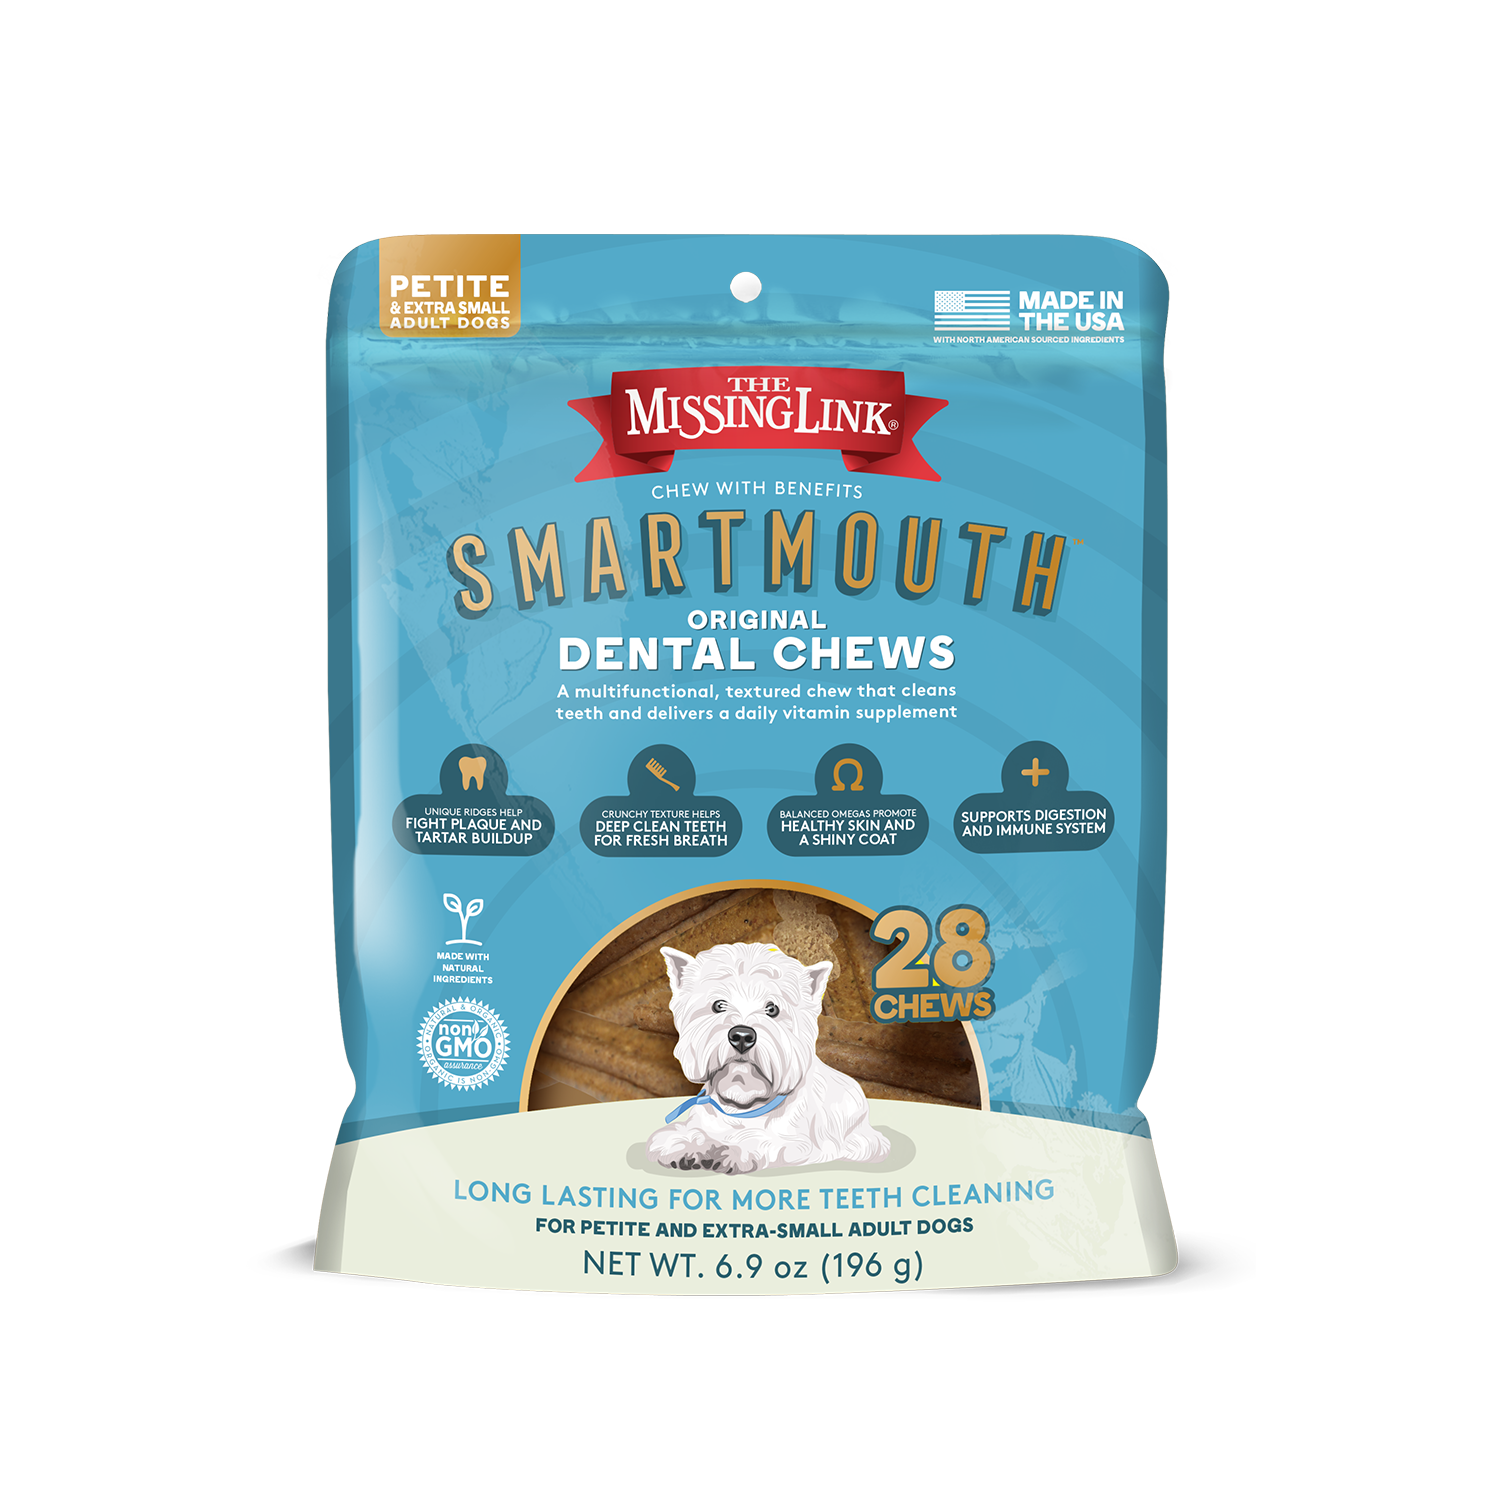 Missing Link Smartmouth Dental Chew Petite/xs - 28ct